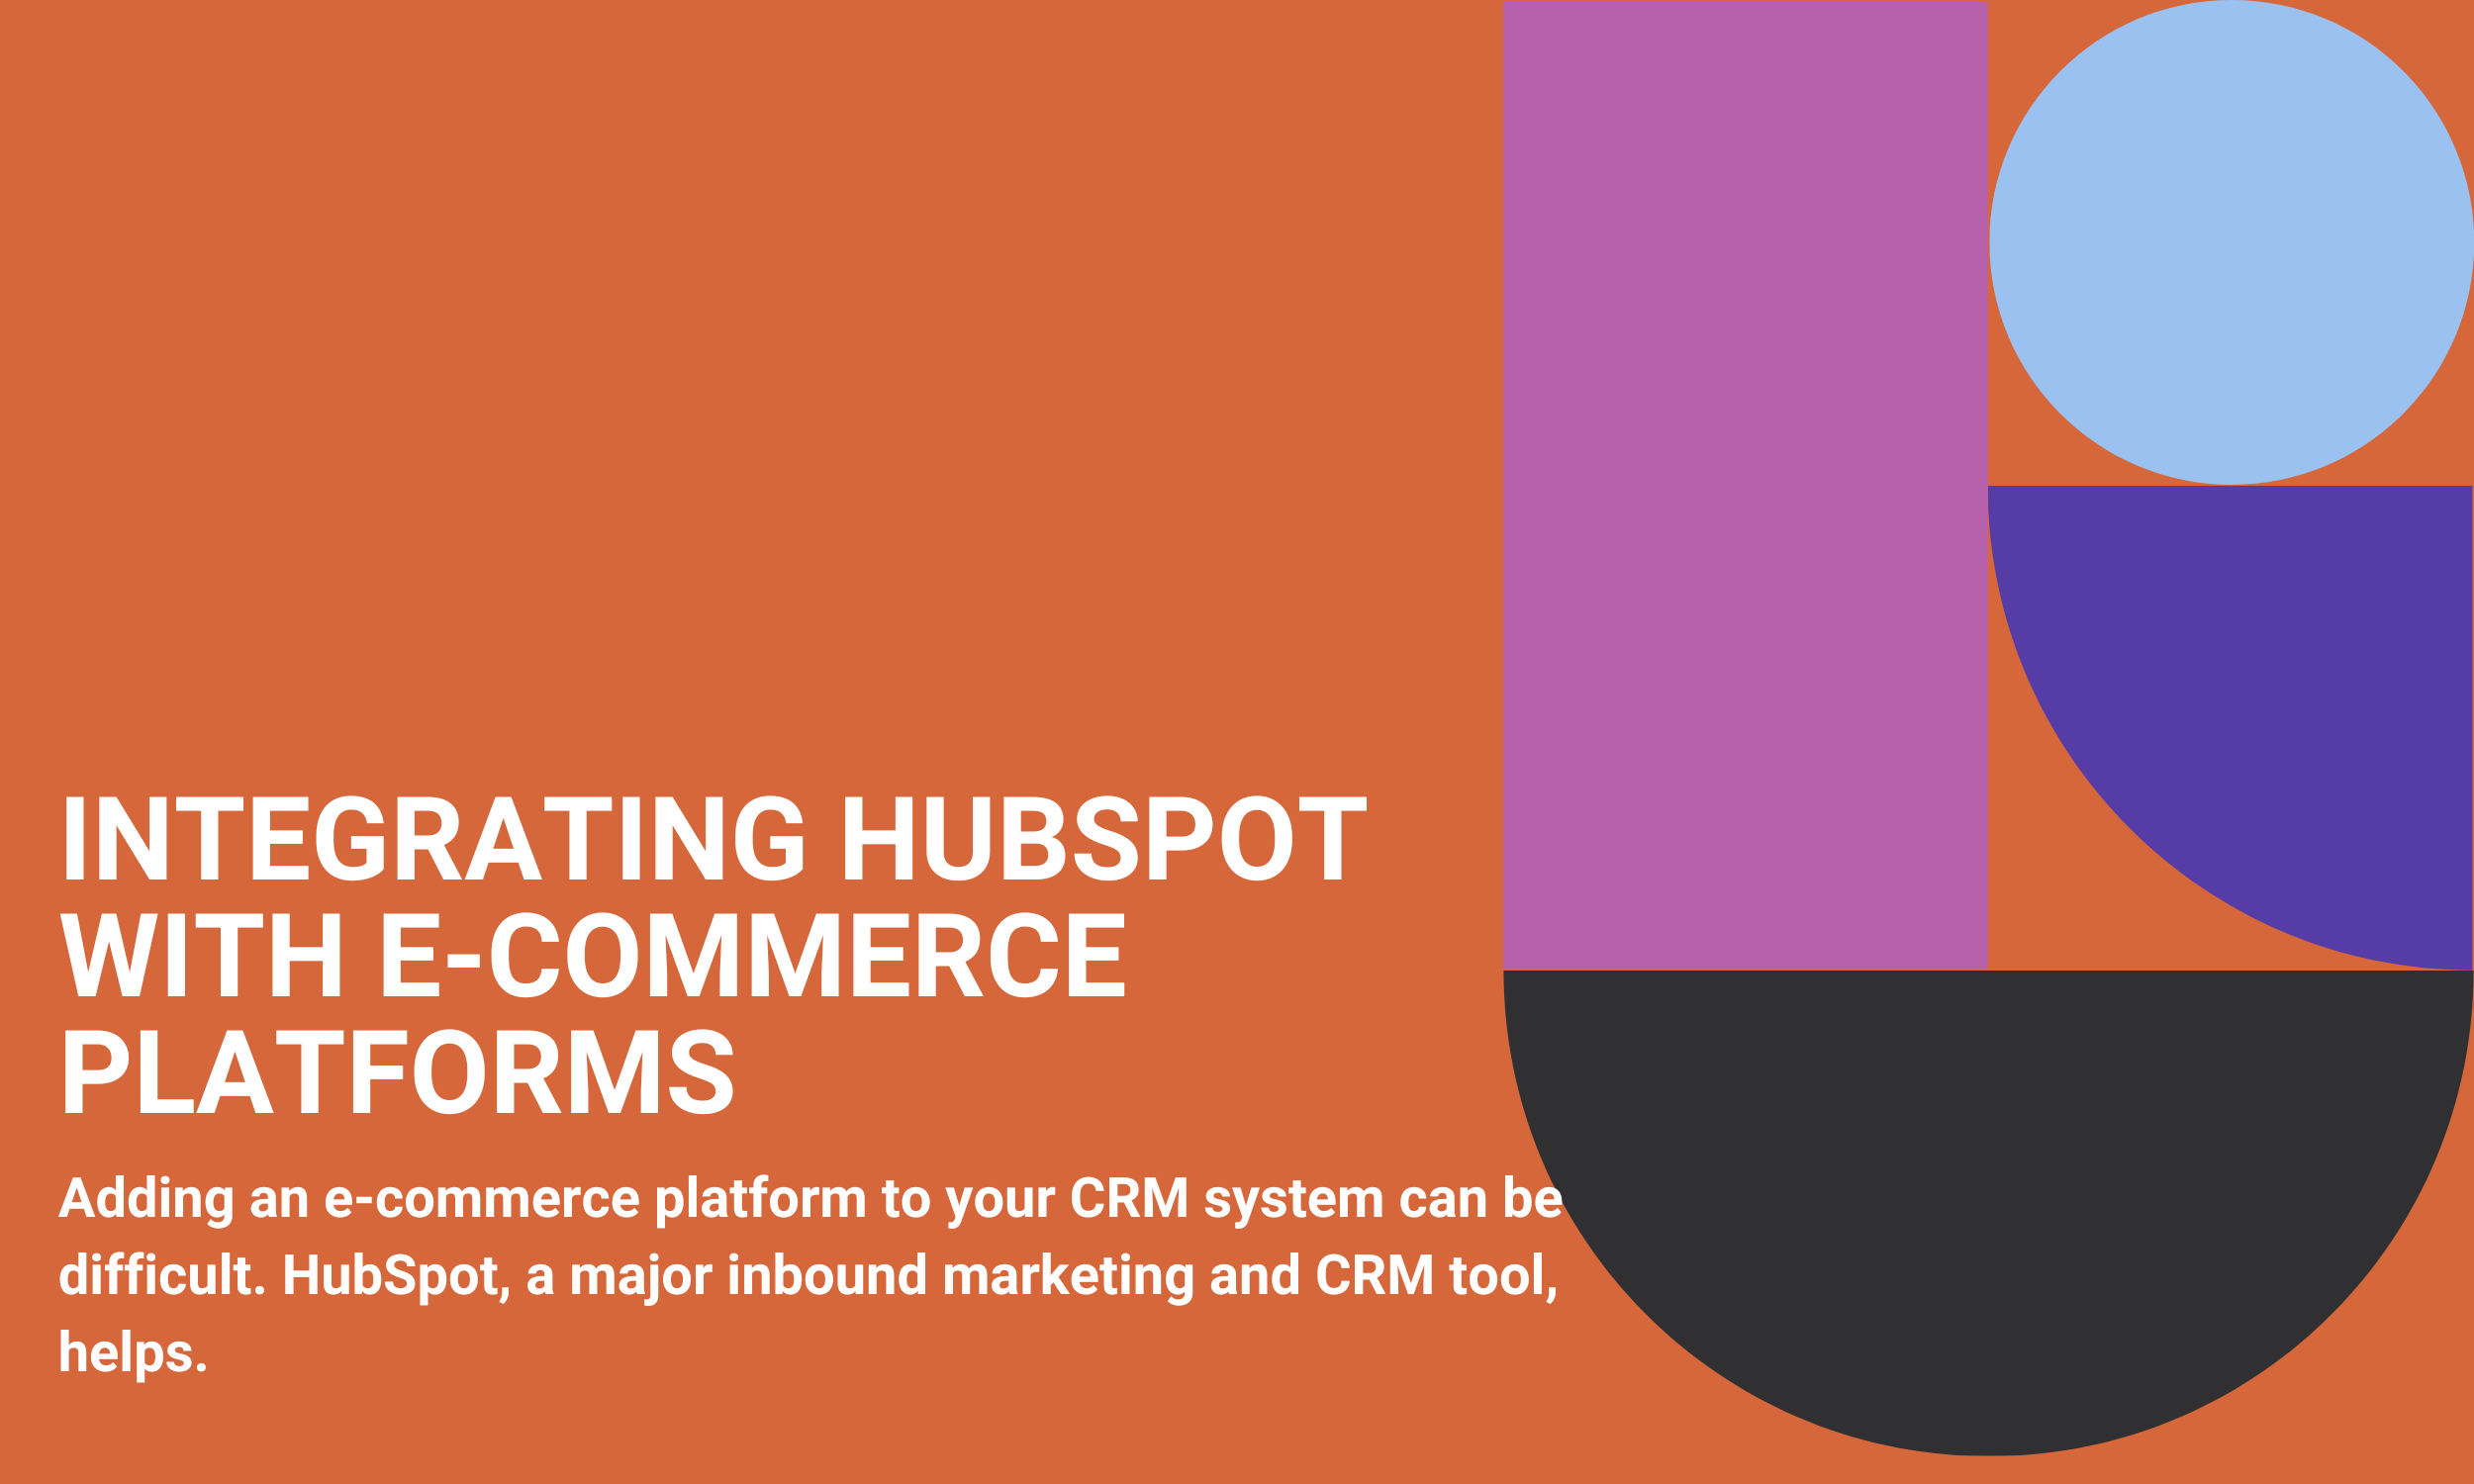 Integrating HubSpot with E-commerce Platforms